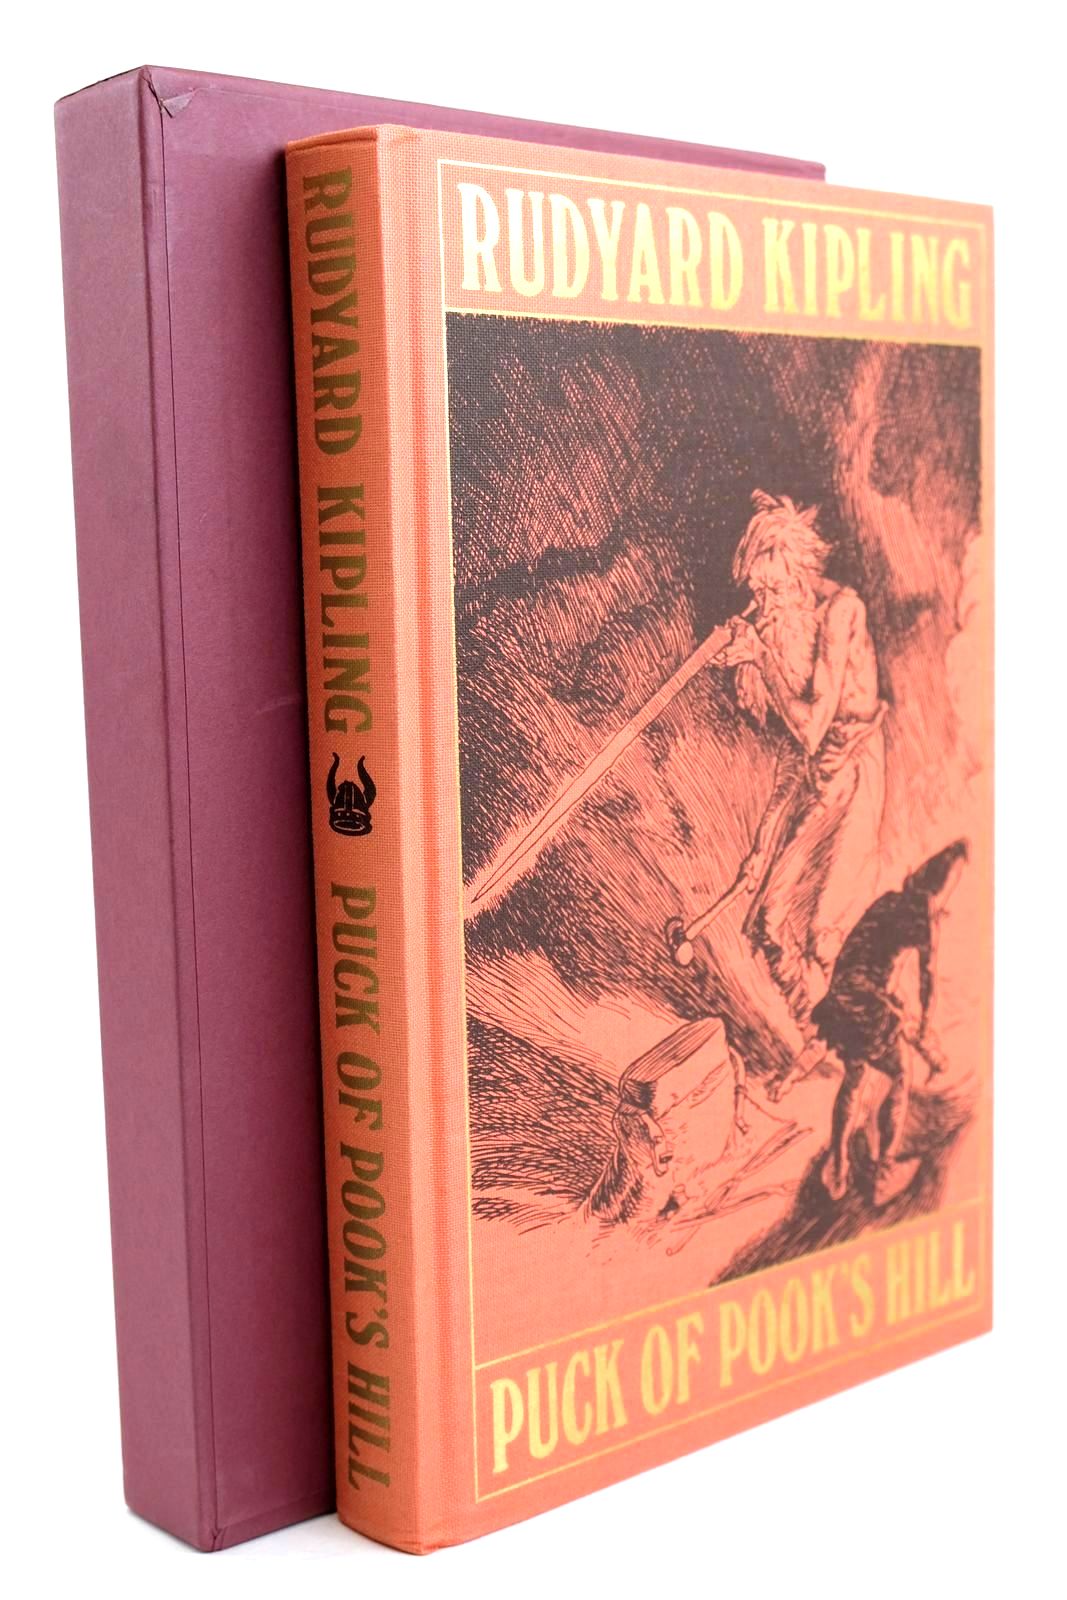 Photo of PUCK OF POOK'S HILL written by Kipling, Rudyard illustrated by Millar, H.R. published by Folio Society (STOCK CODE: 1320532)  for sale by Stella & Rose's Books